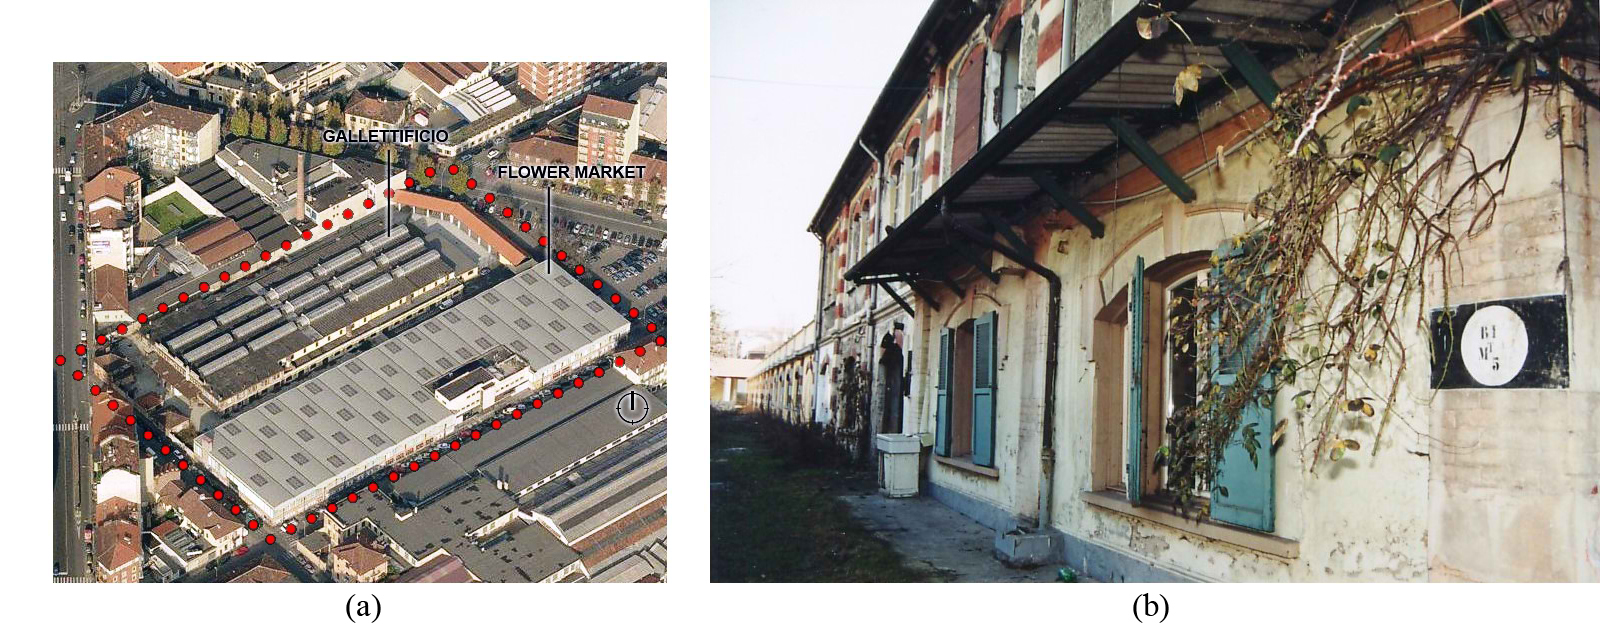 (a) Aerial view of the design site and (b) an image of the ‘Gallettificio’ designed by Fenoglio.